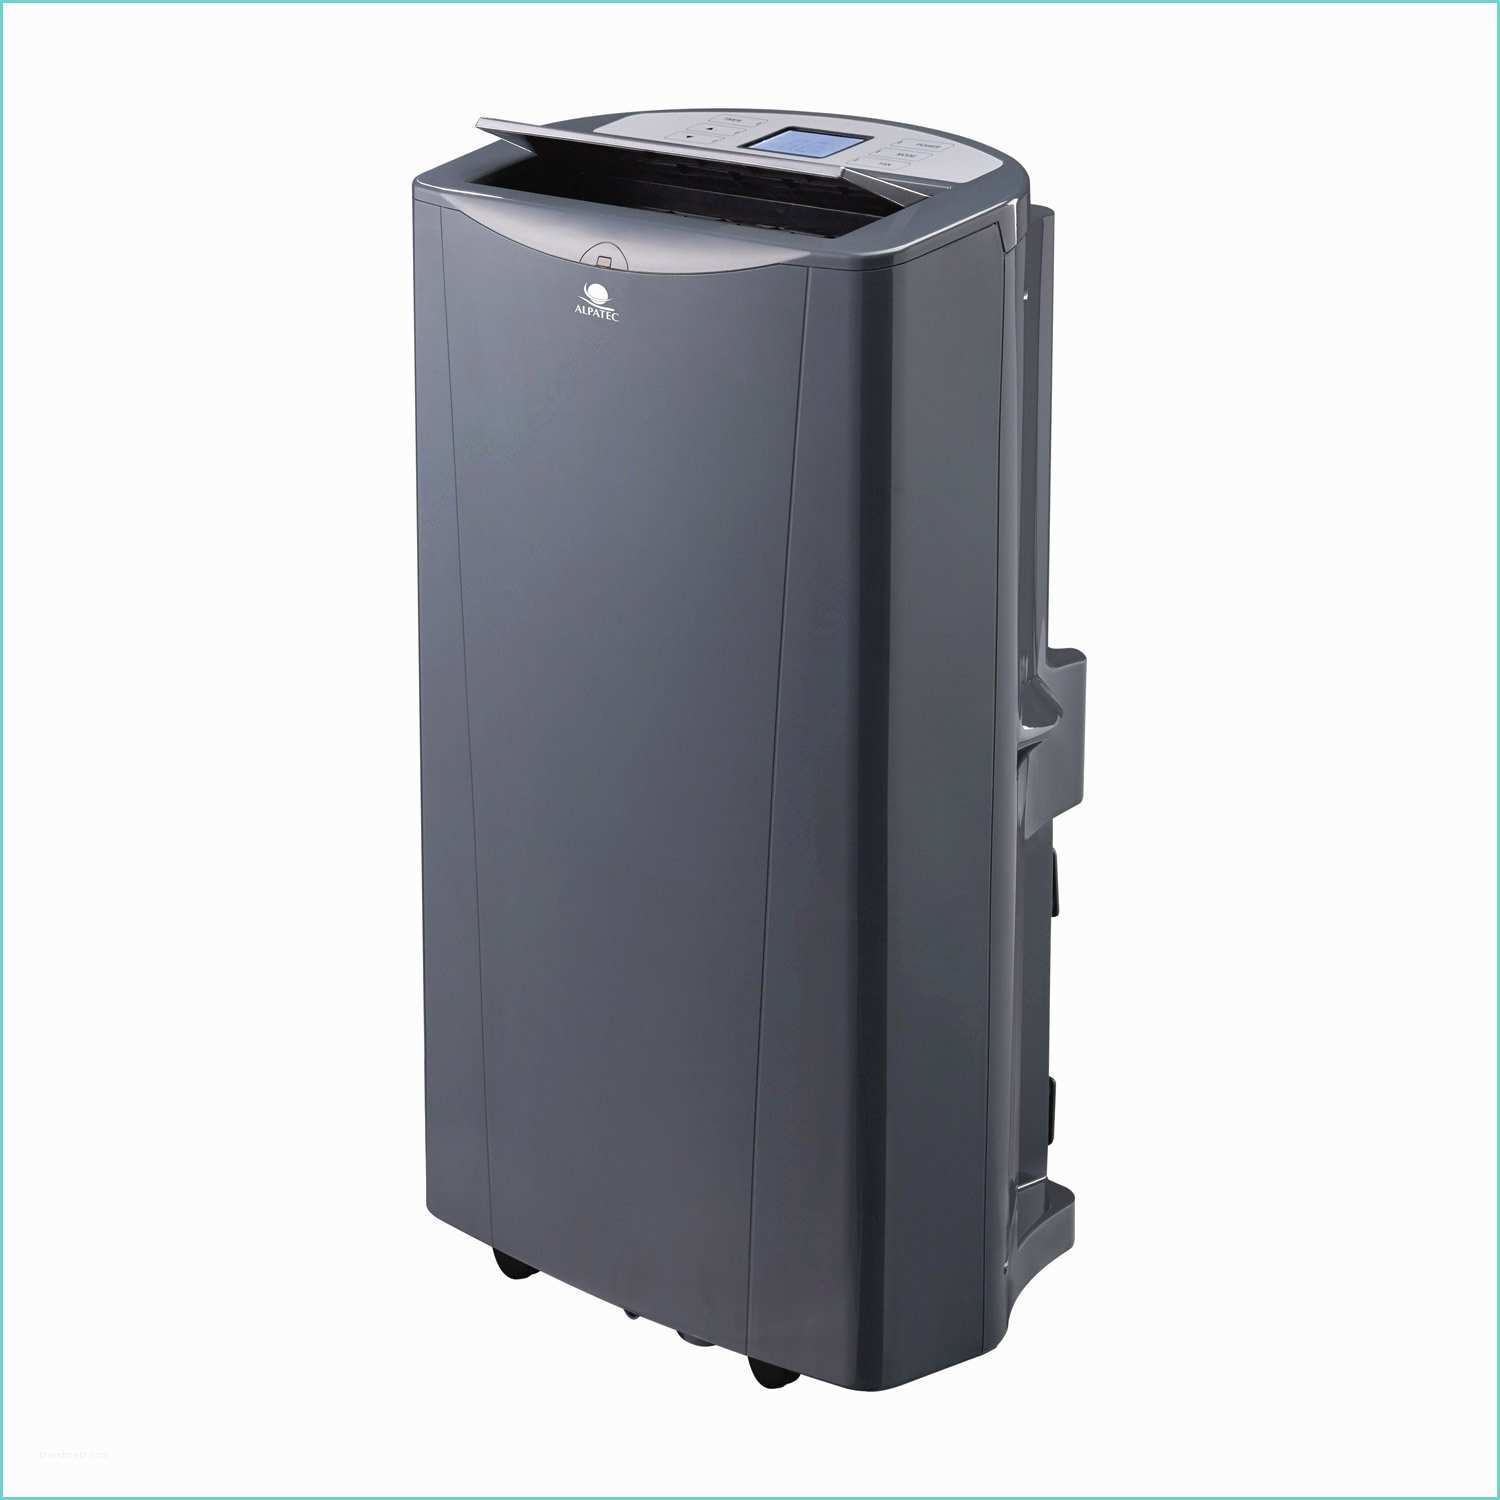 Climatiseur Mobile Leroy Merlin Climatiseur Mobile Ac 35 S 3500 W